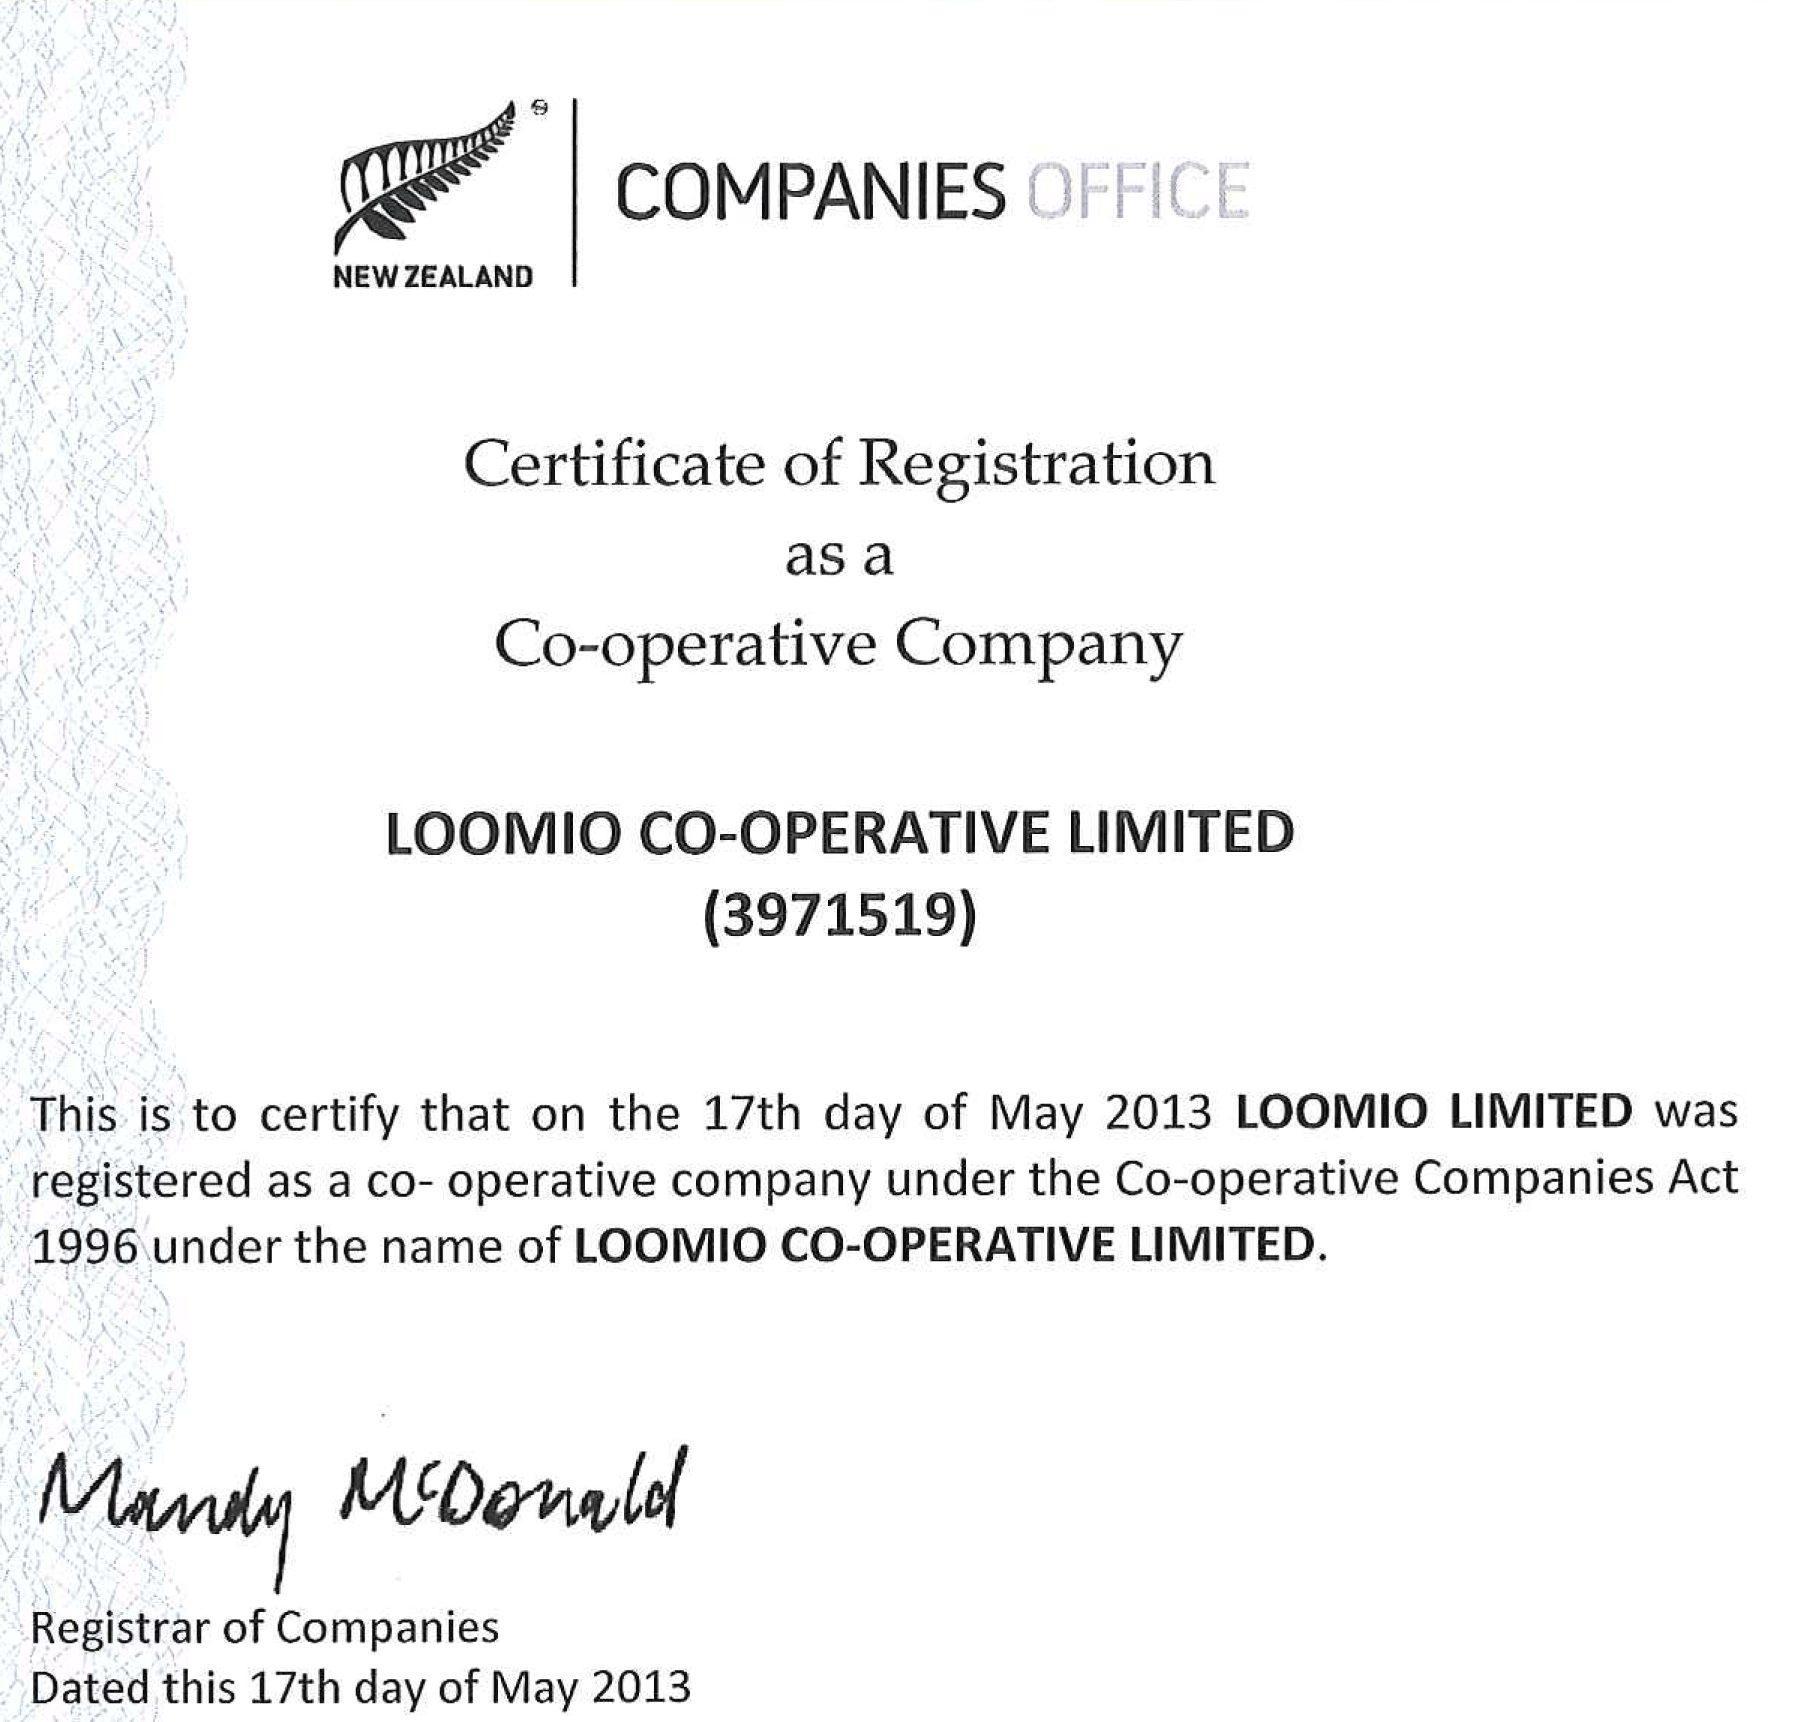 The Loomio Cooperative Certificate of Registration